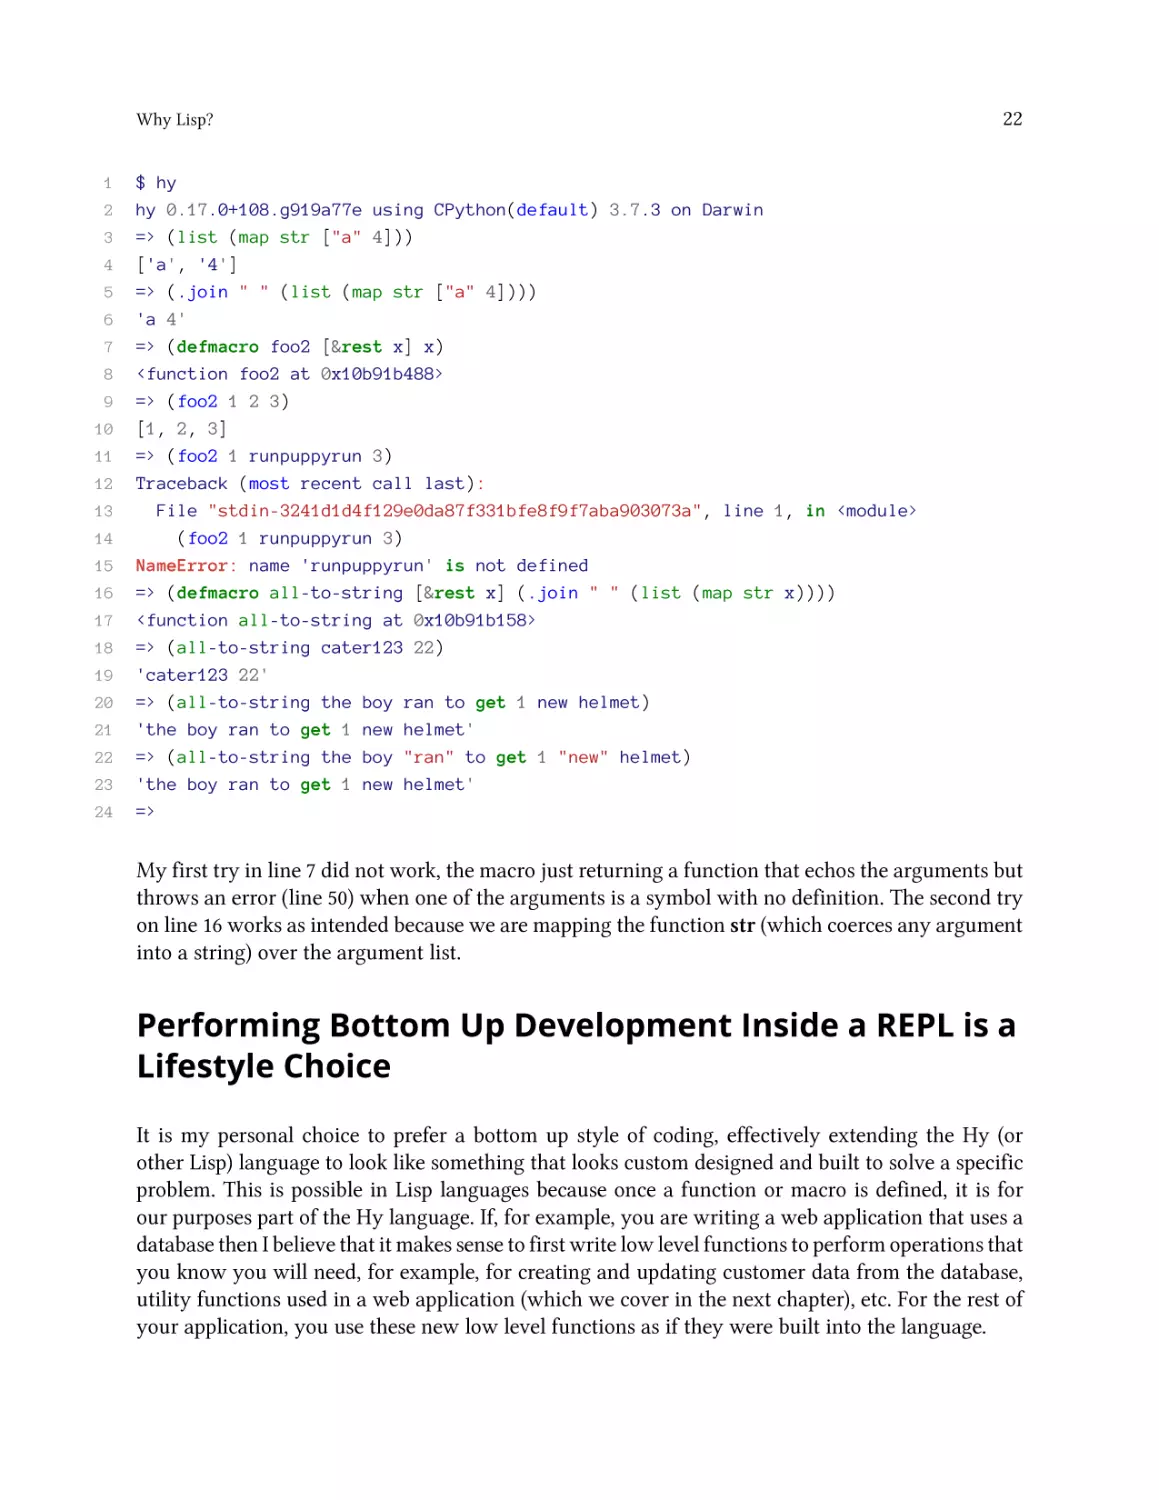 Performing Bottom Up Development Inside a REPL is a Lifestyle Choice